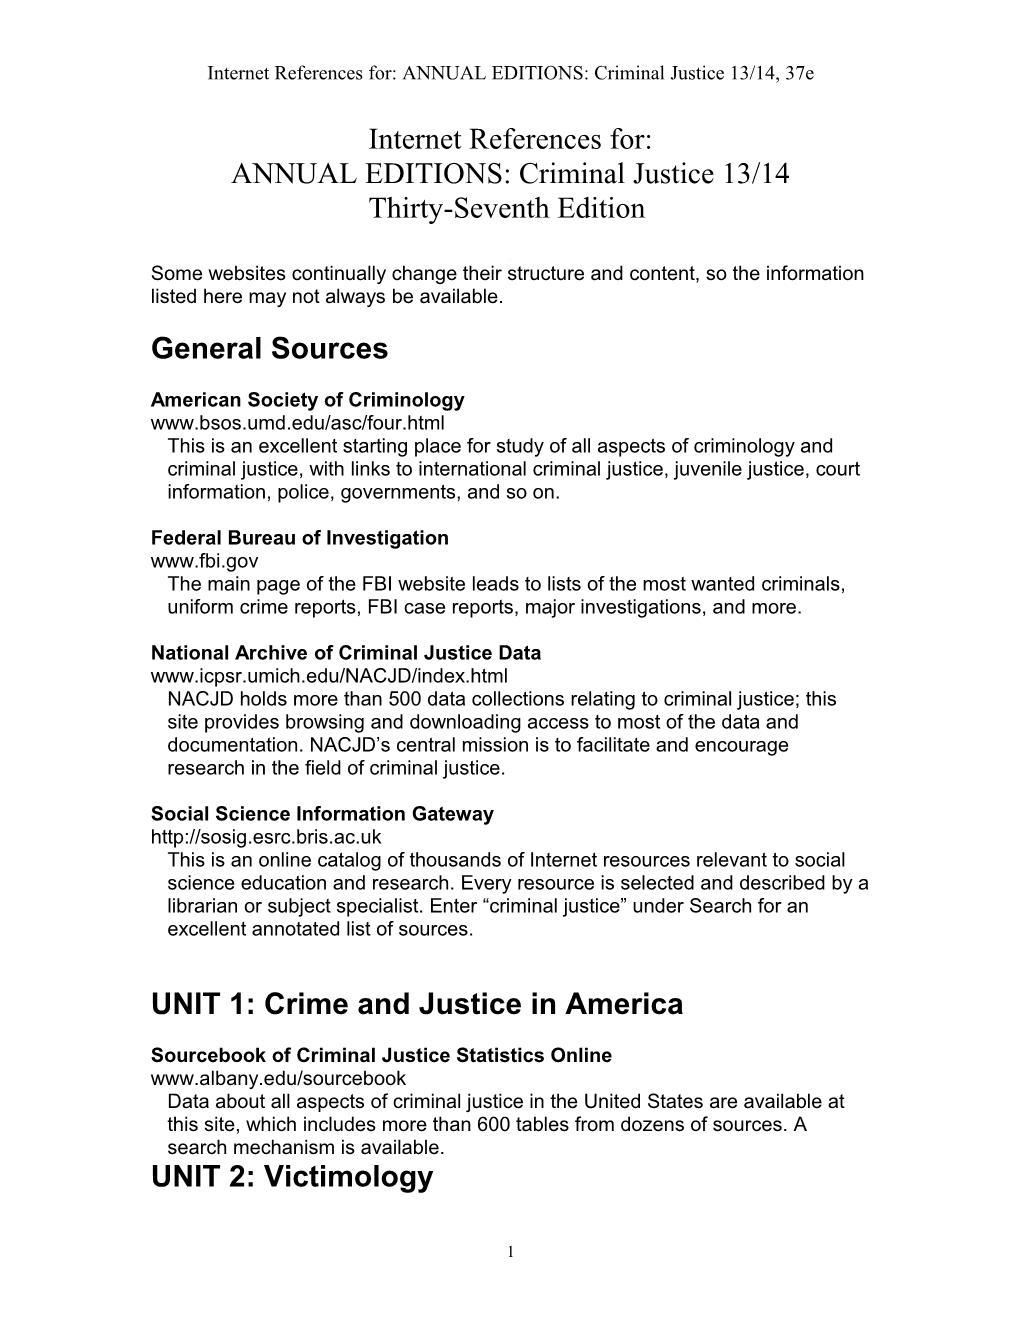 Internet References For:ANNUAL EDITIONS: Criminal Justice 13/14, 37E